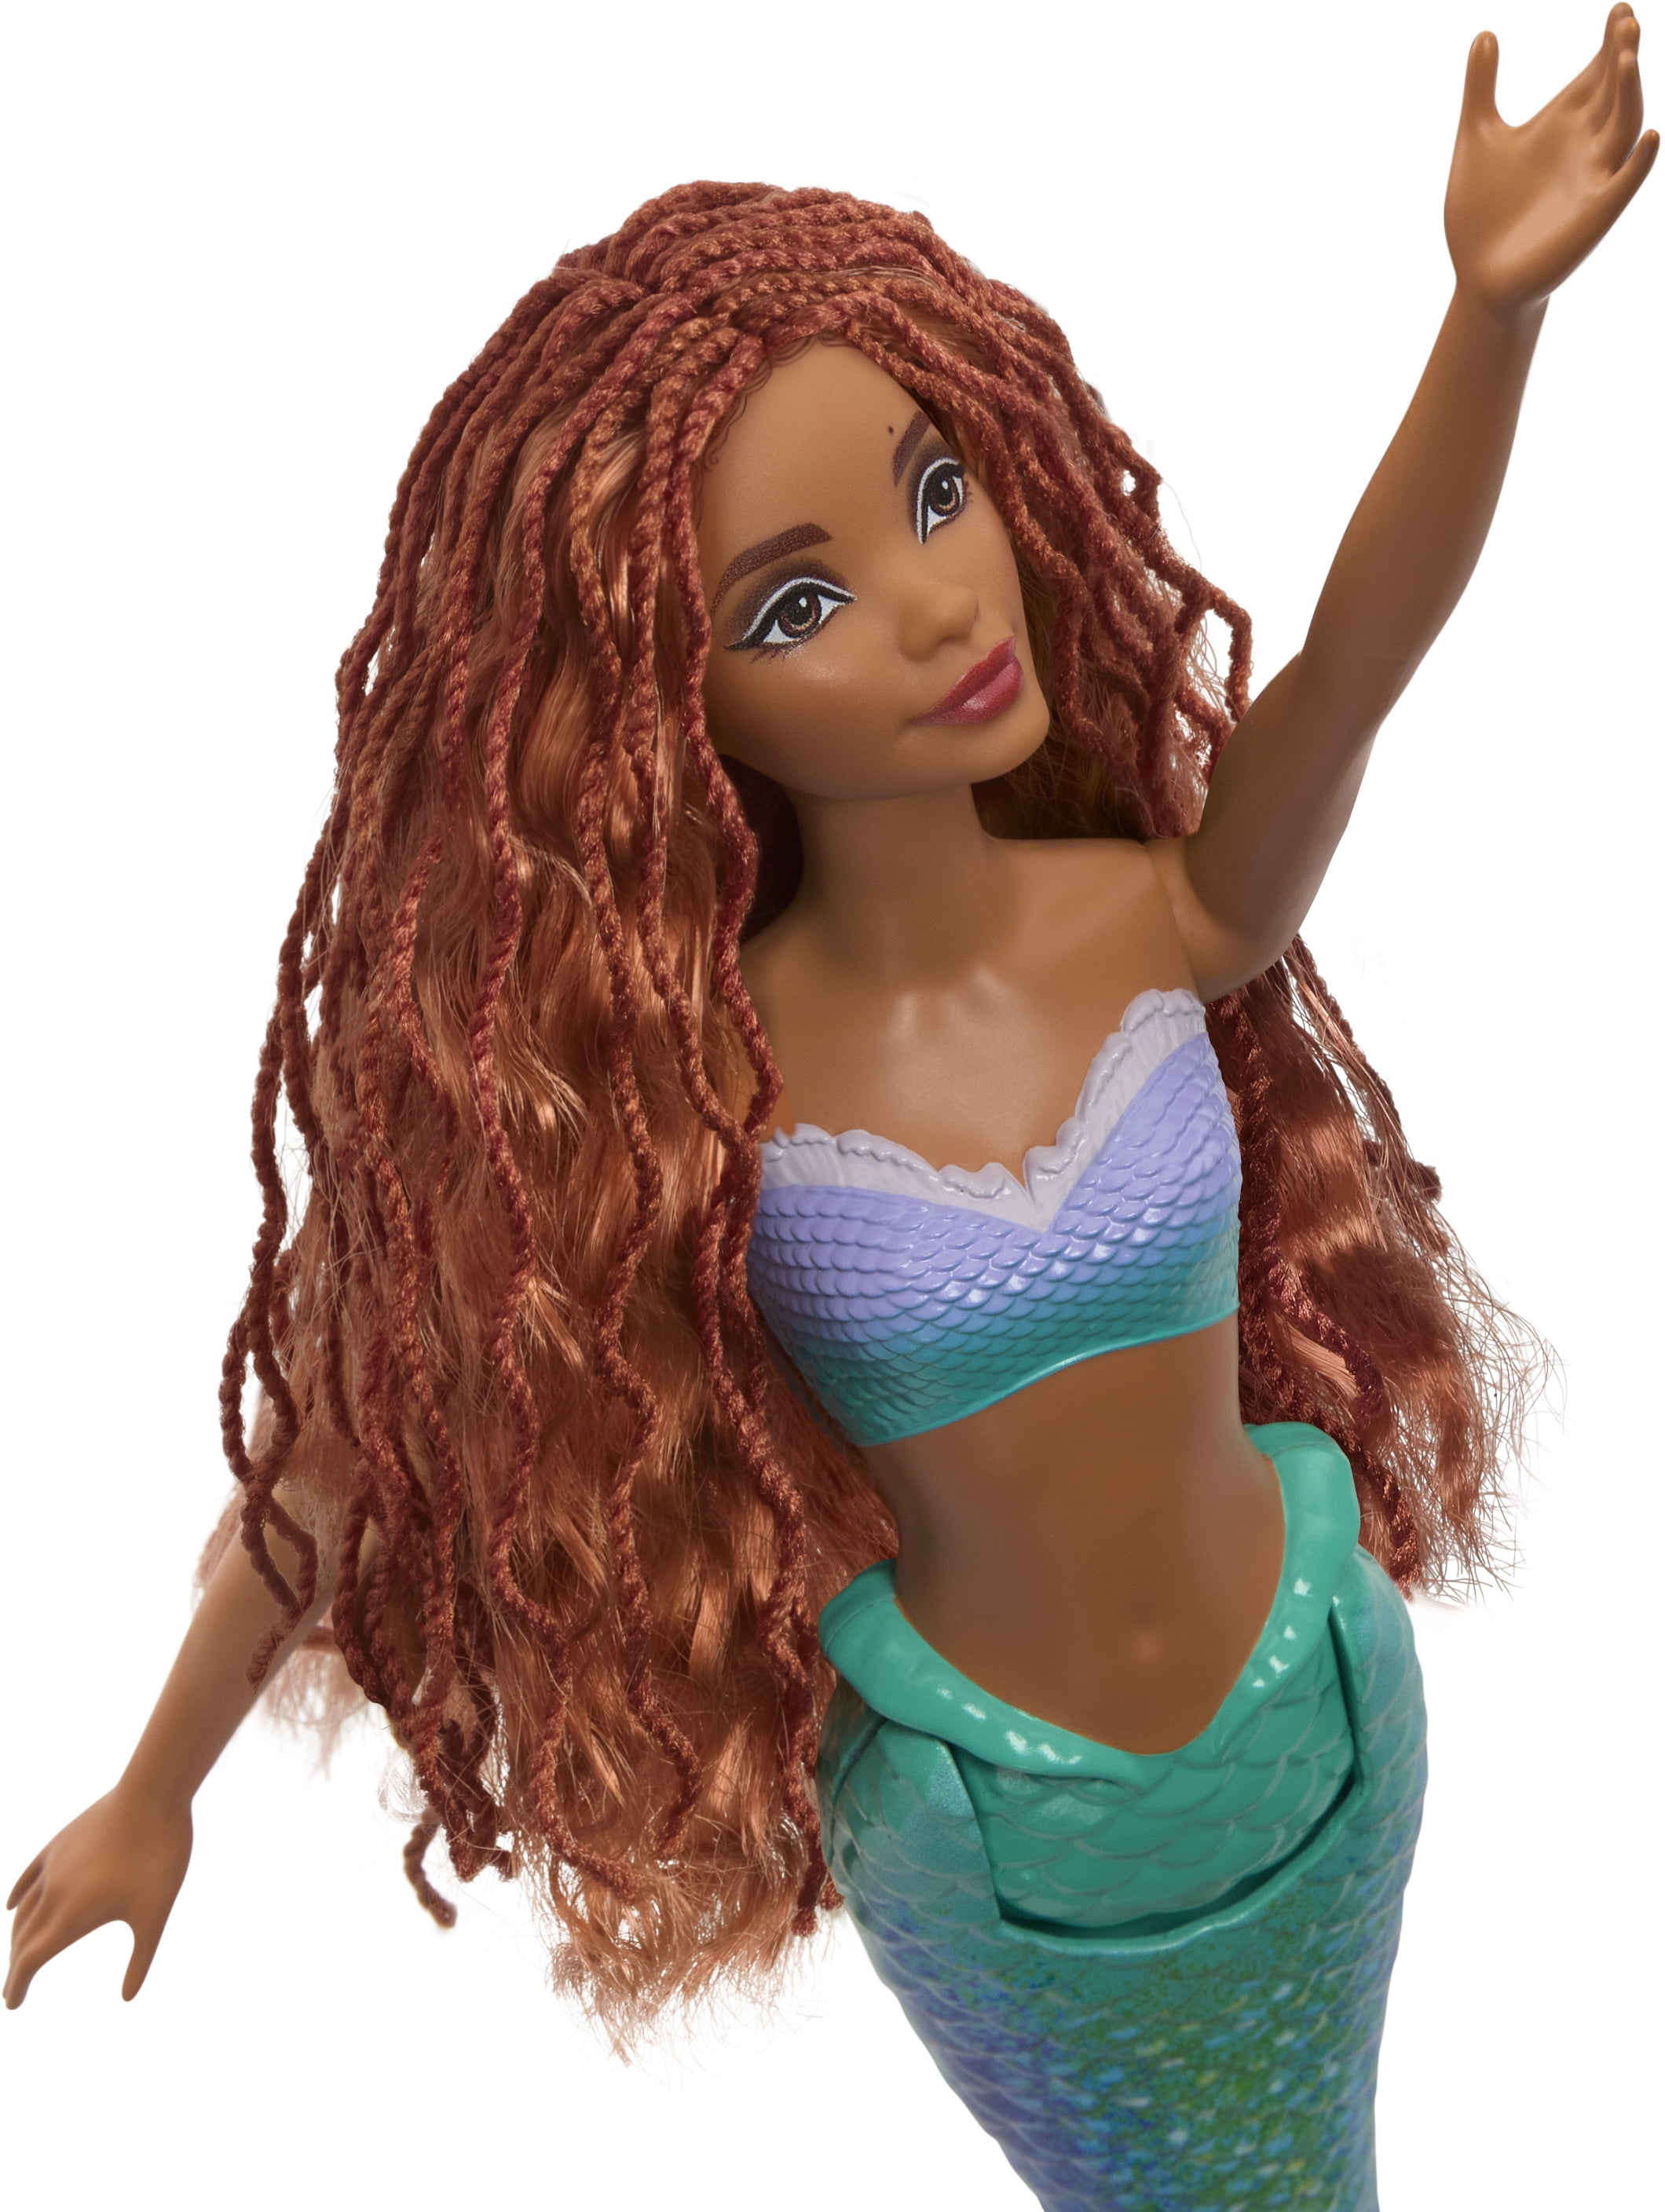 Disney's new Little Mermaid doll is here and you can order it now on